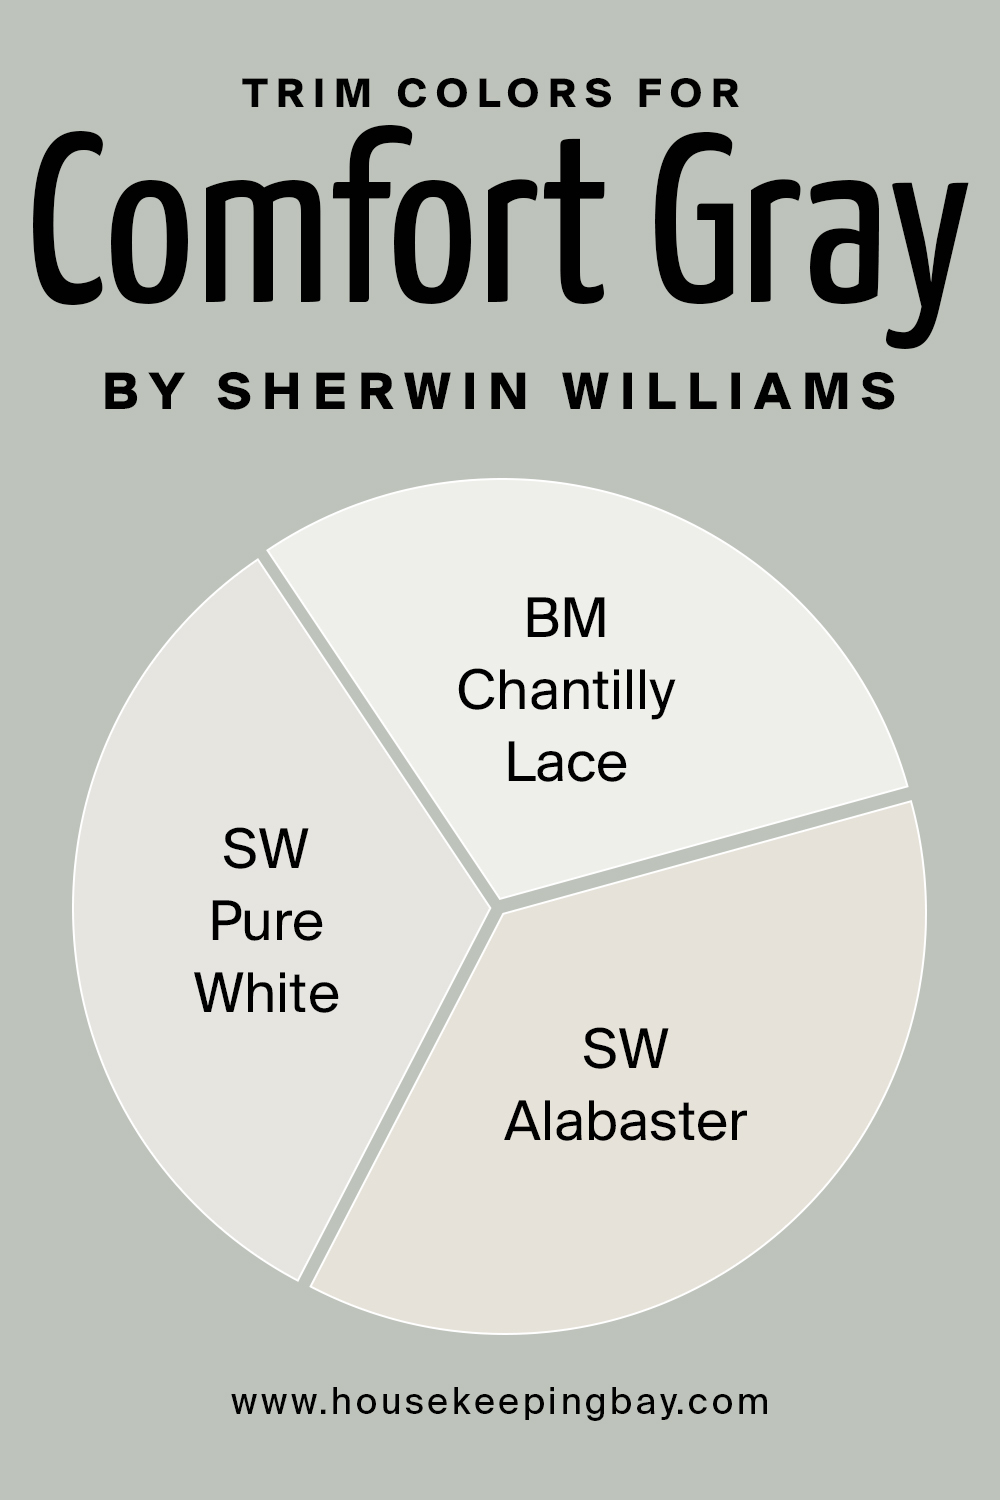 Trim Colors for Comfort Gray by Sherwin Williams